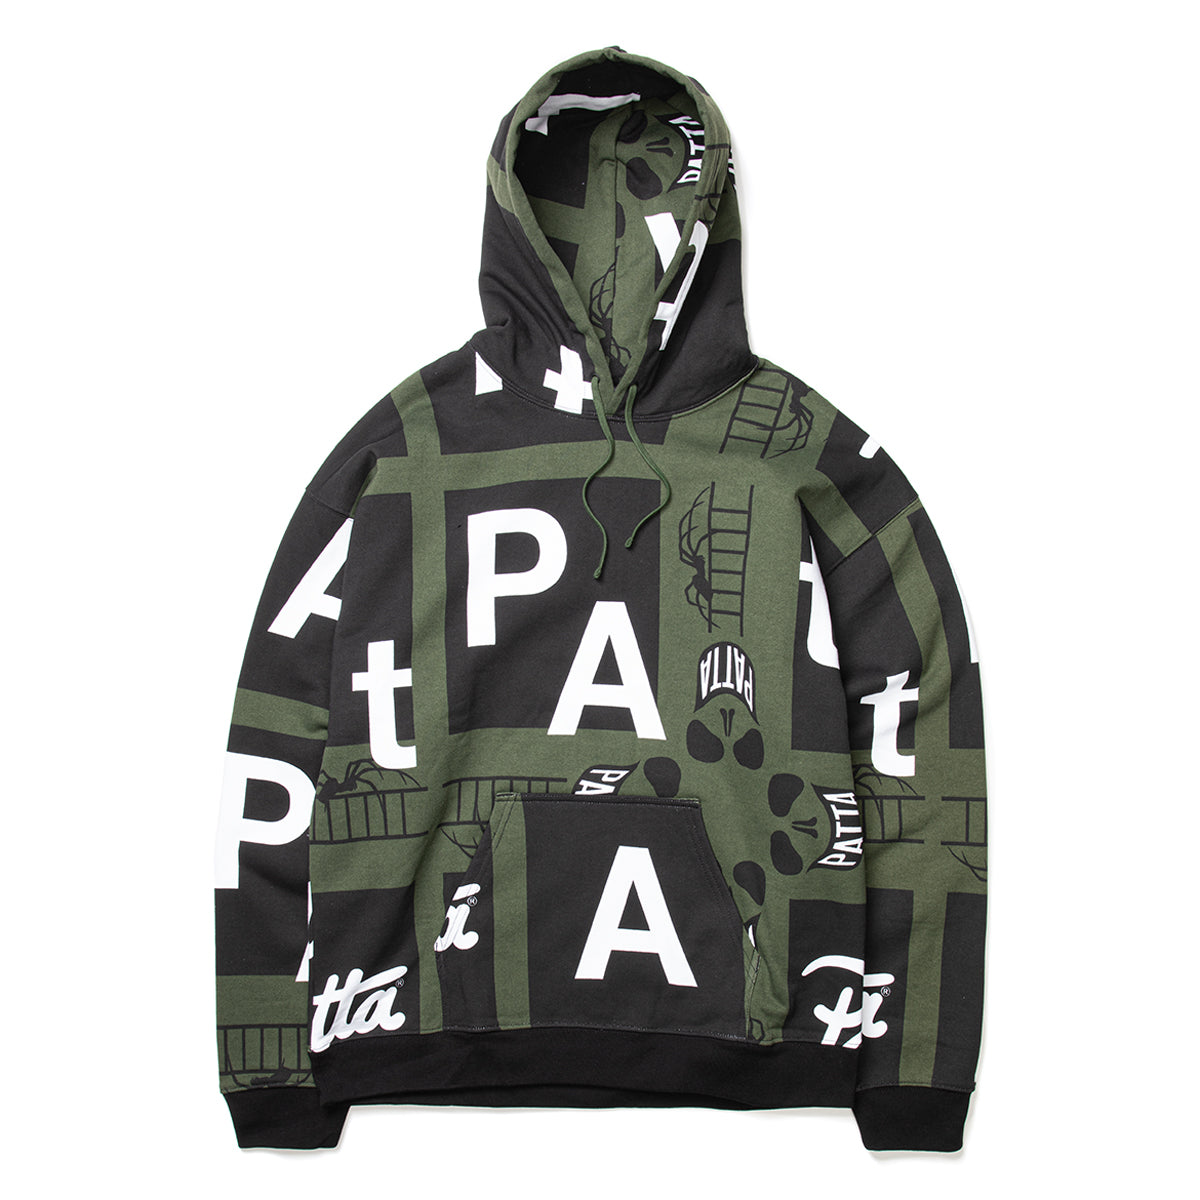 Patta Spider AOP Hooded Sweater (Rifle Green)